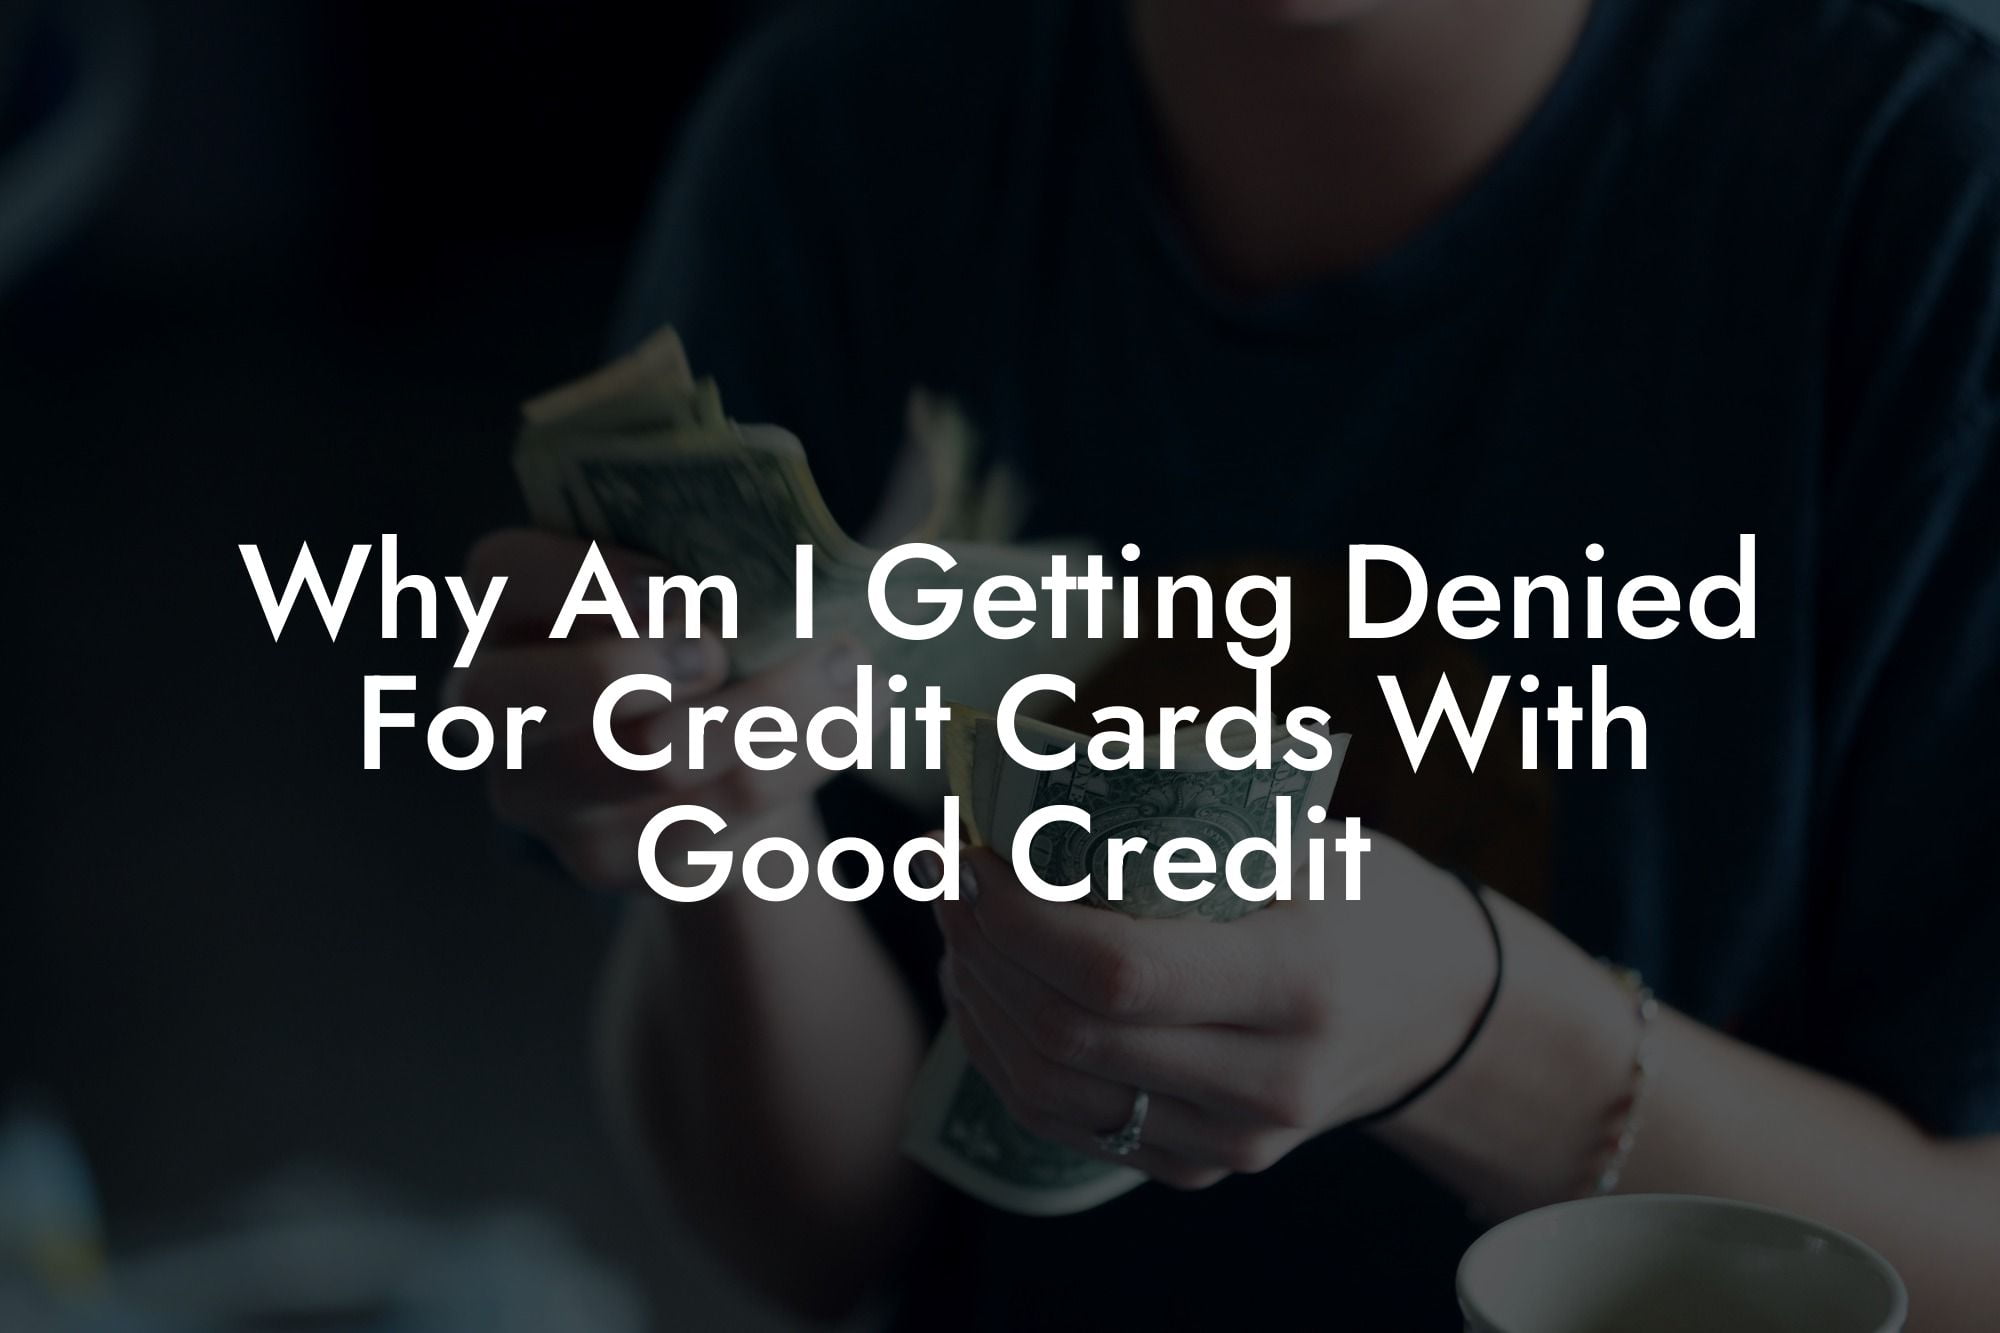 Why Am I Getting Denied For Credit Cards With Good Credit